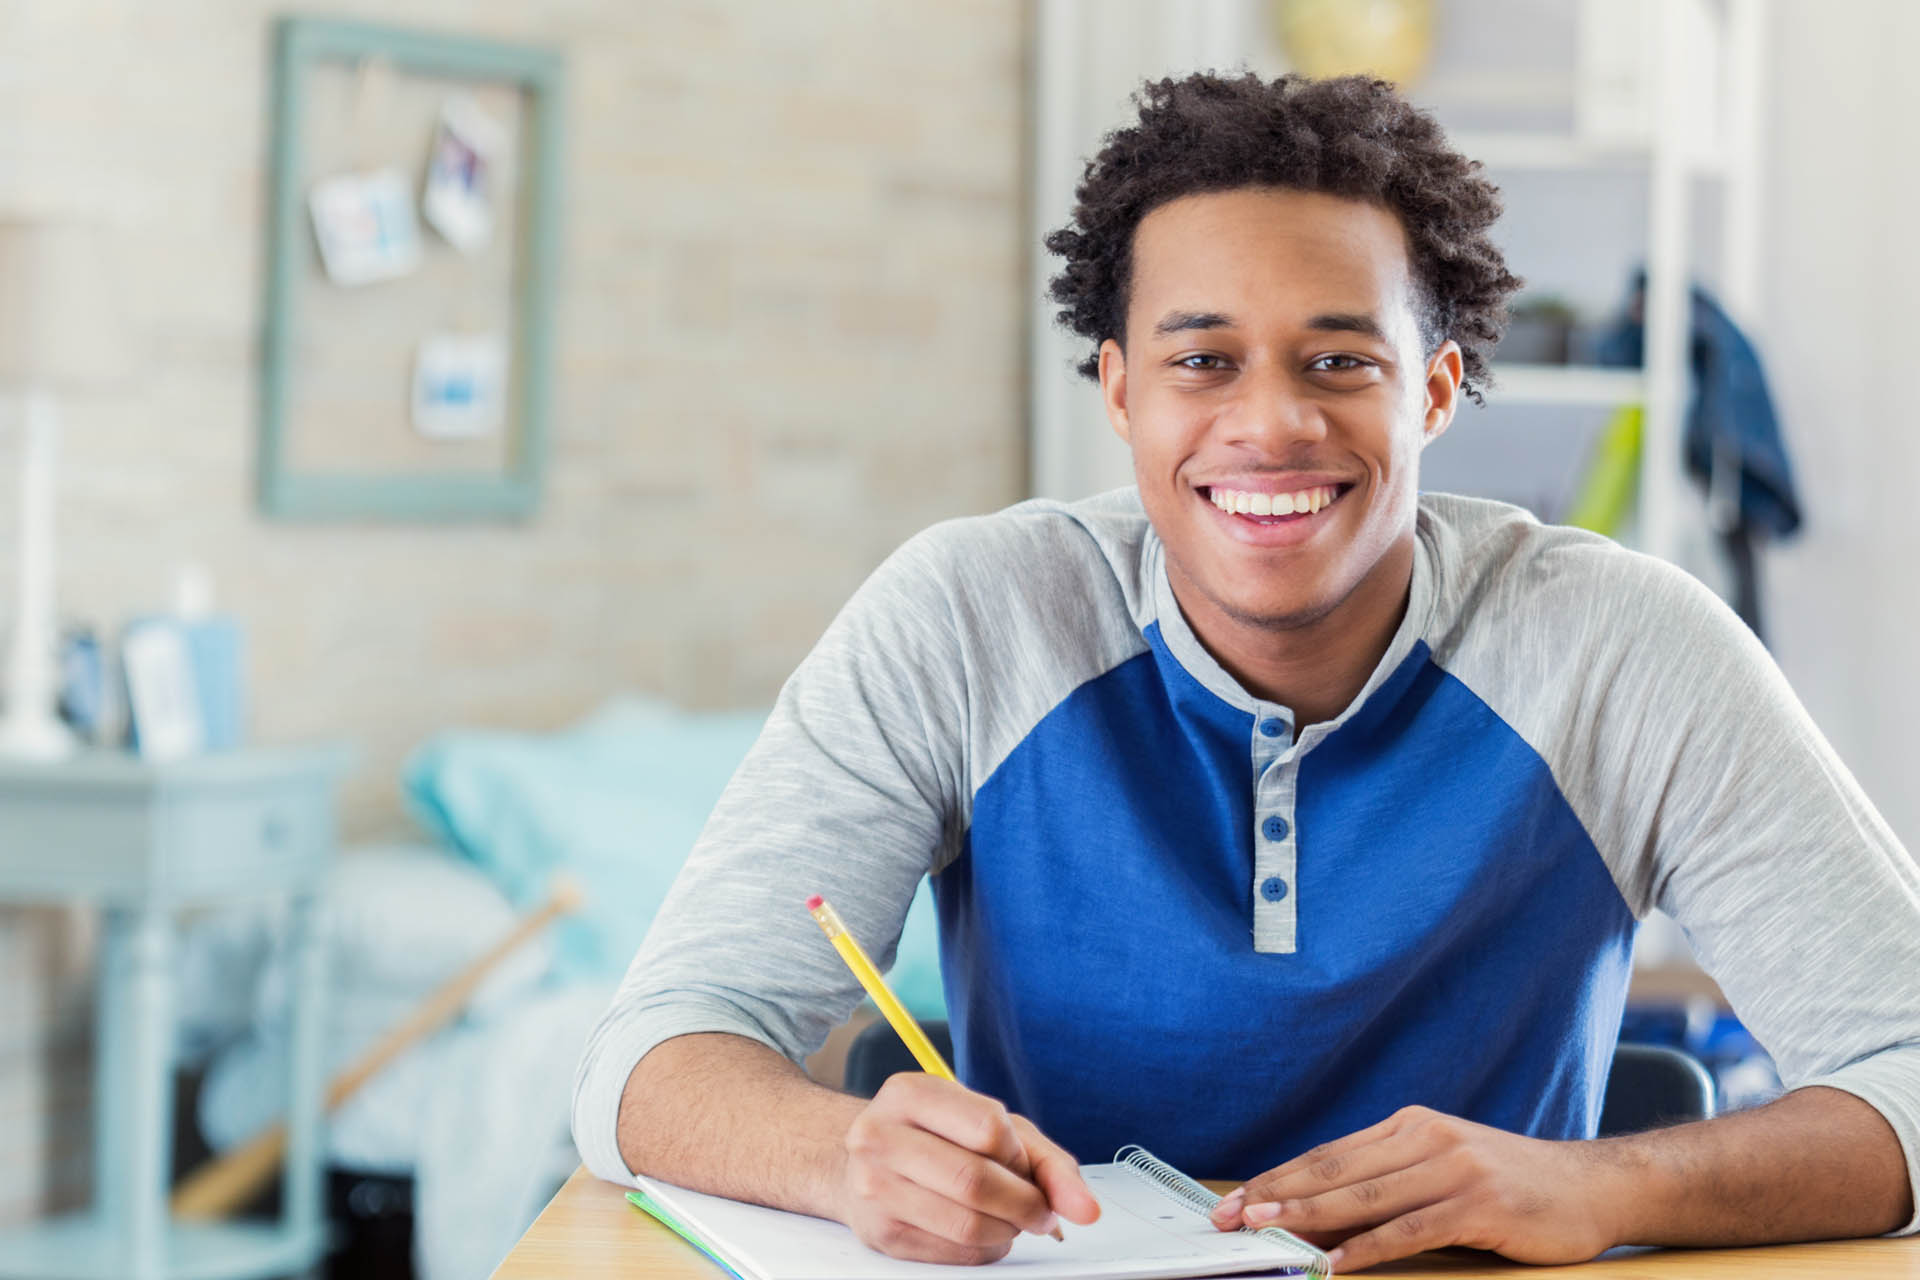 Cheerful African American teenage boy studies in his room. He is smiling at the camera. He is writing in a spiral notebook.